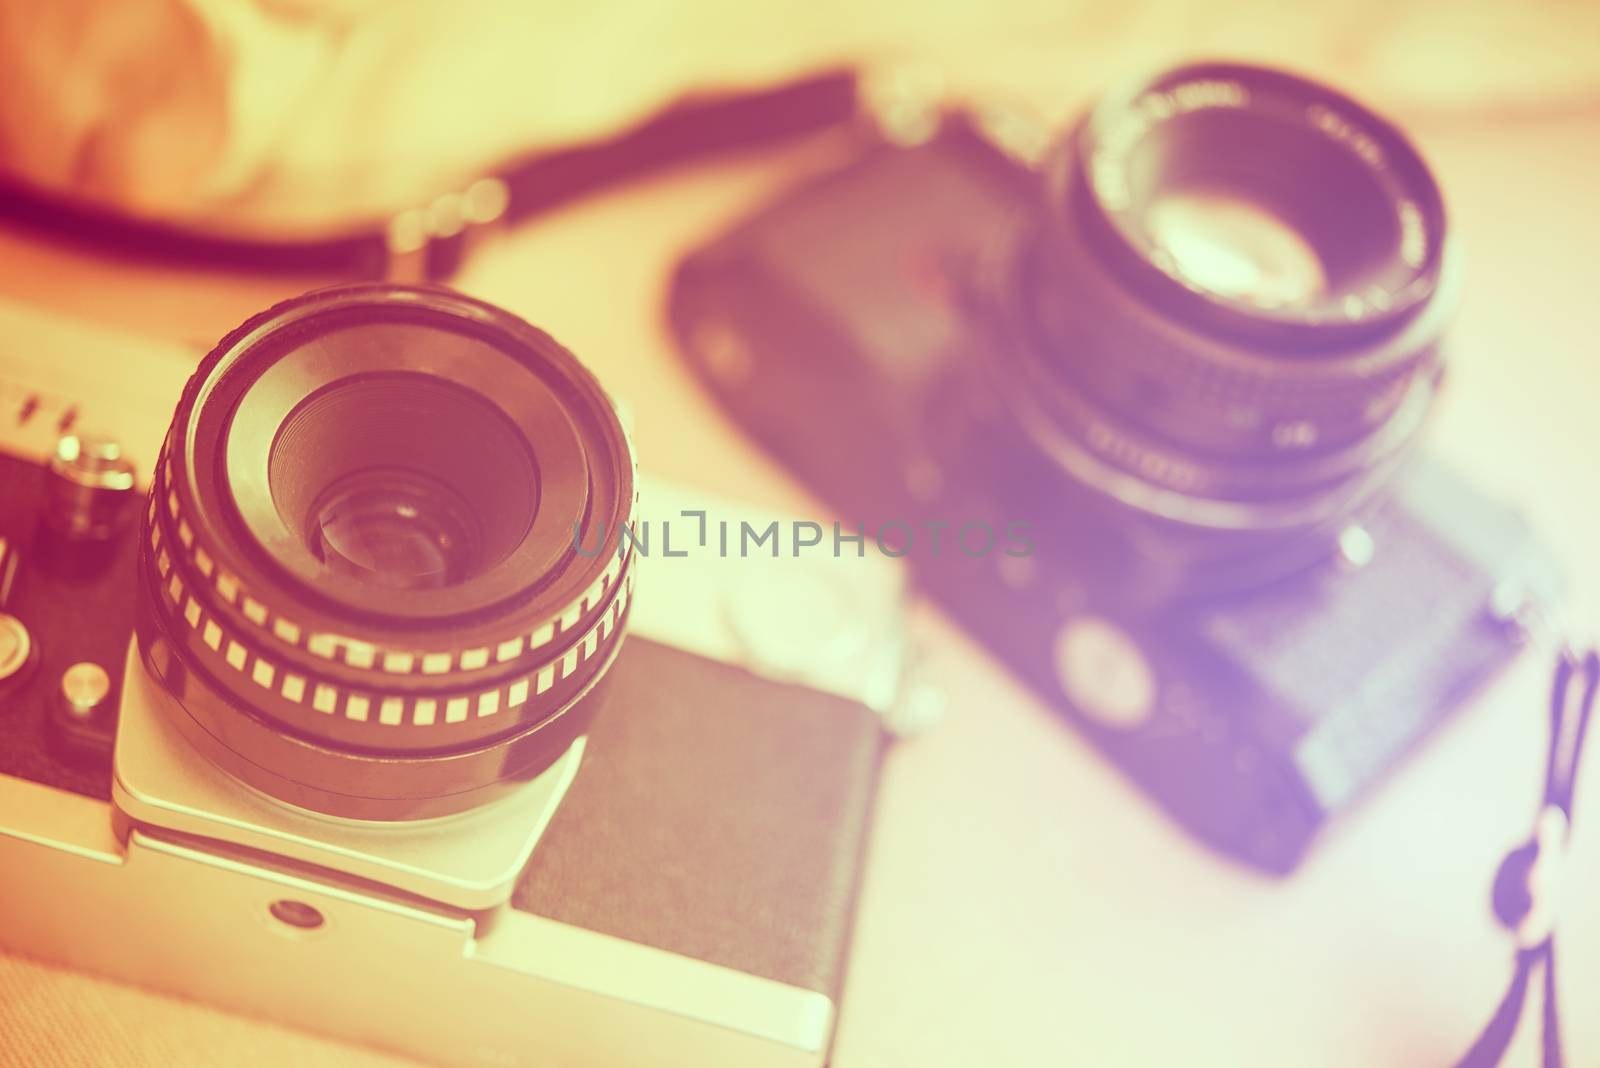 Vintage Photography Cameras by welcomia